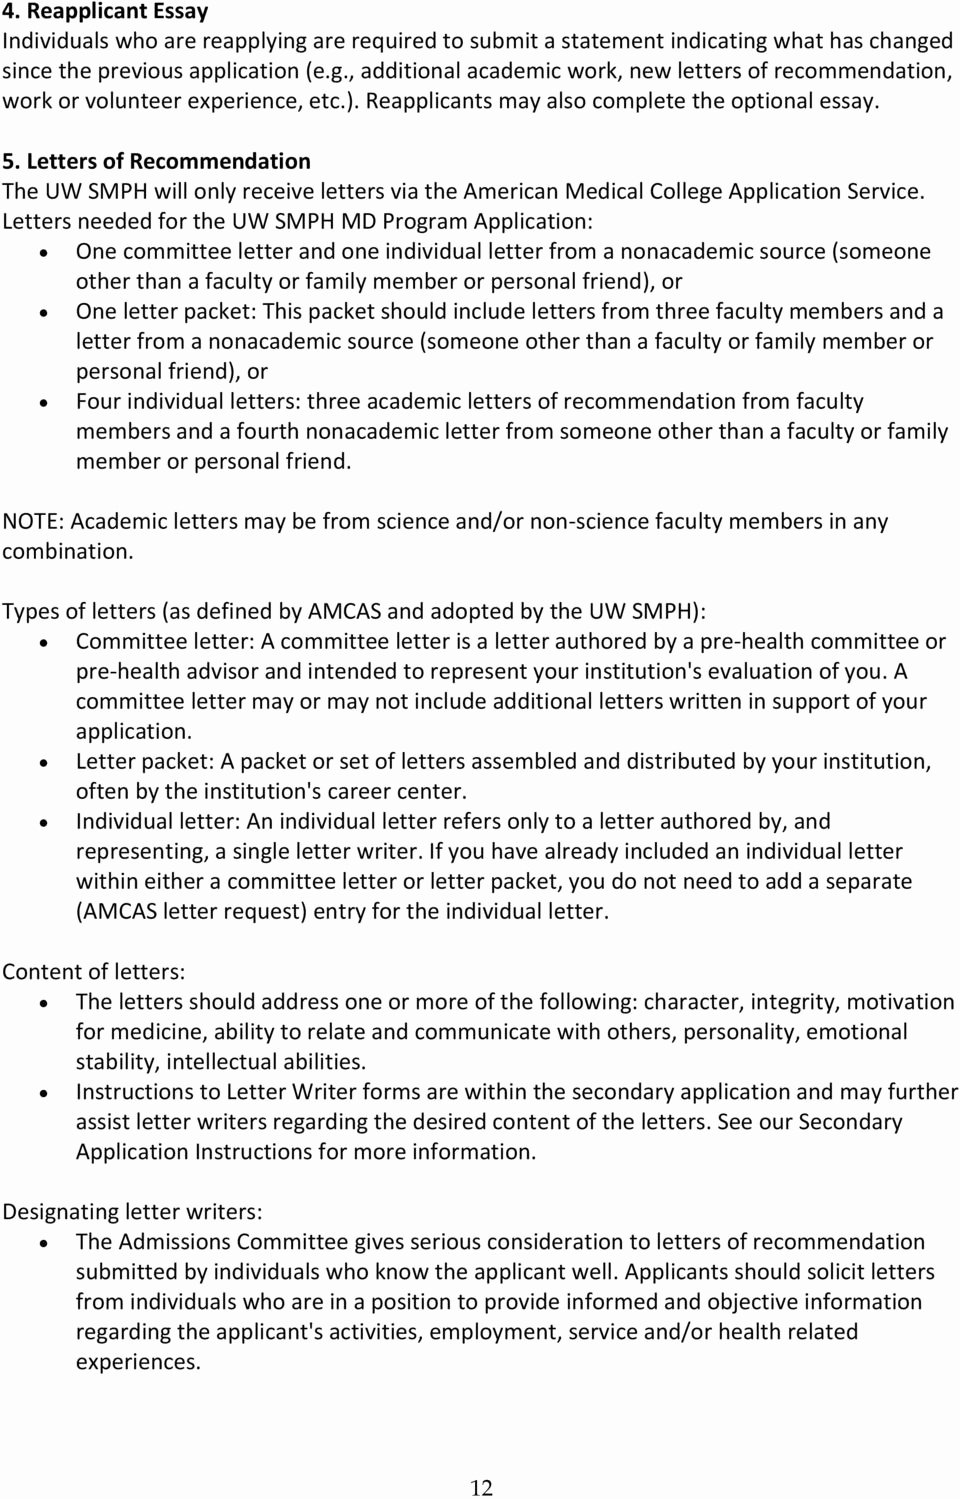 Amcas Letter Of Recommendation Guide Inspirational University Of Wisconsin School Of Medicine and Public